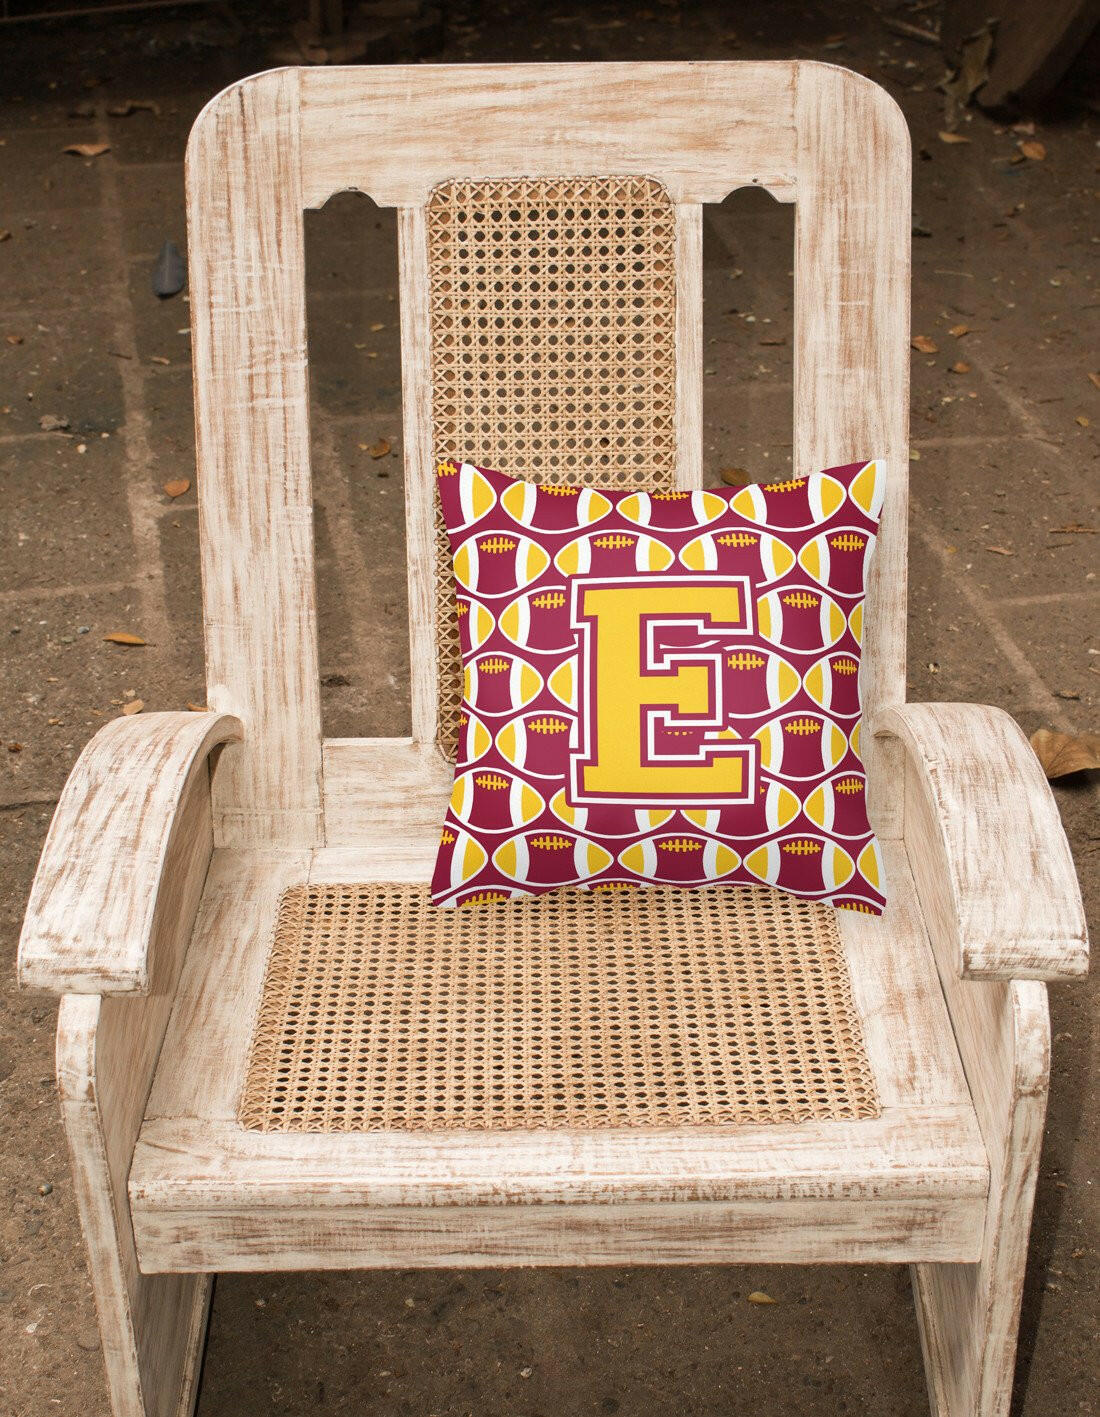 Letter E Football Maroon and Gold Fabric Decorative Pillow CJ1081-EPW1414 by Caroline's Treasures